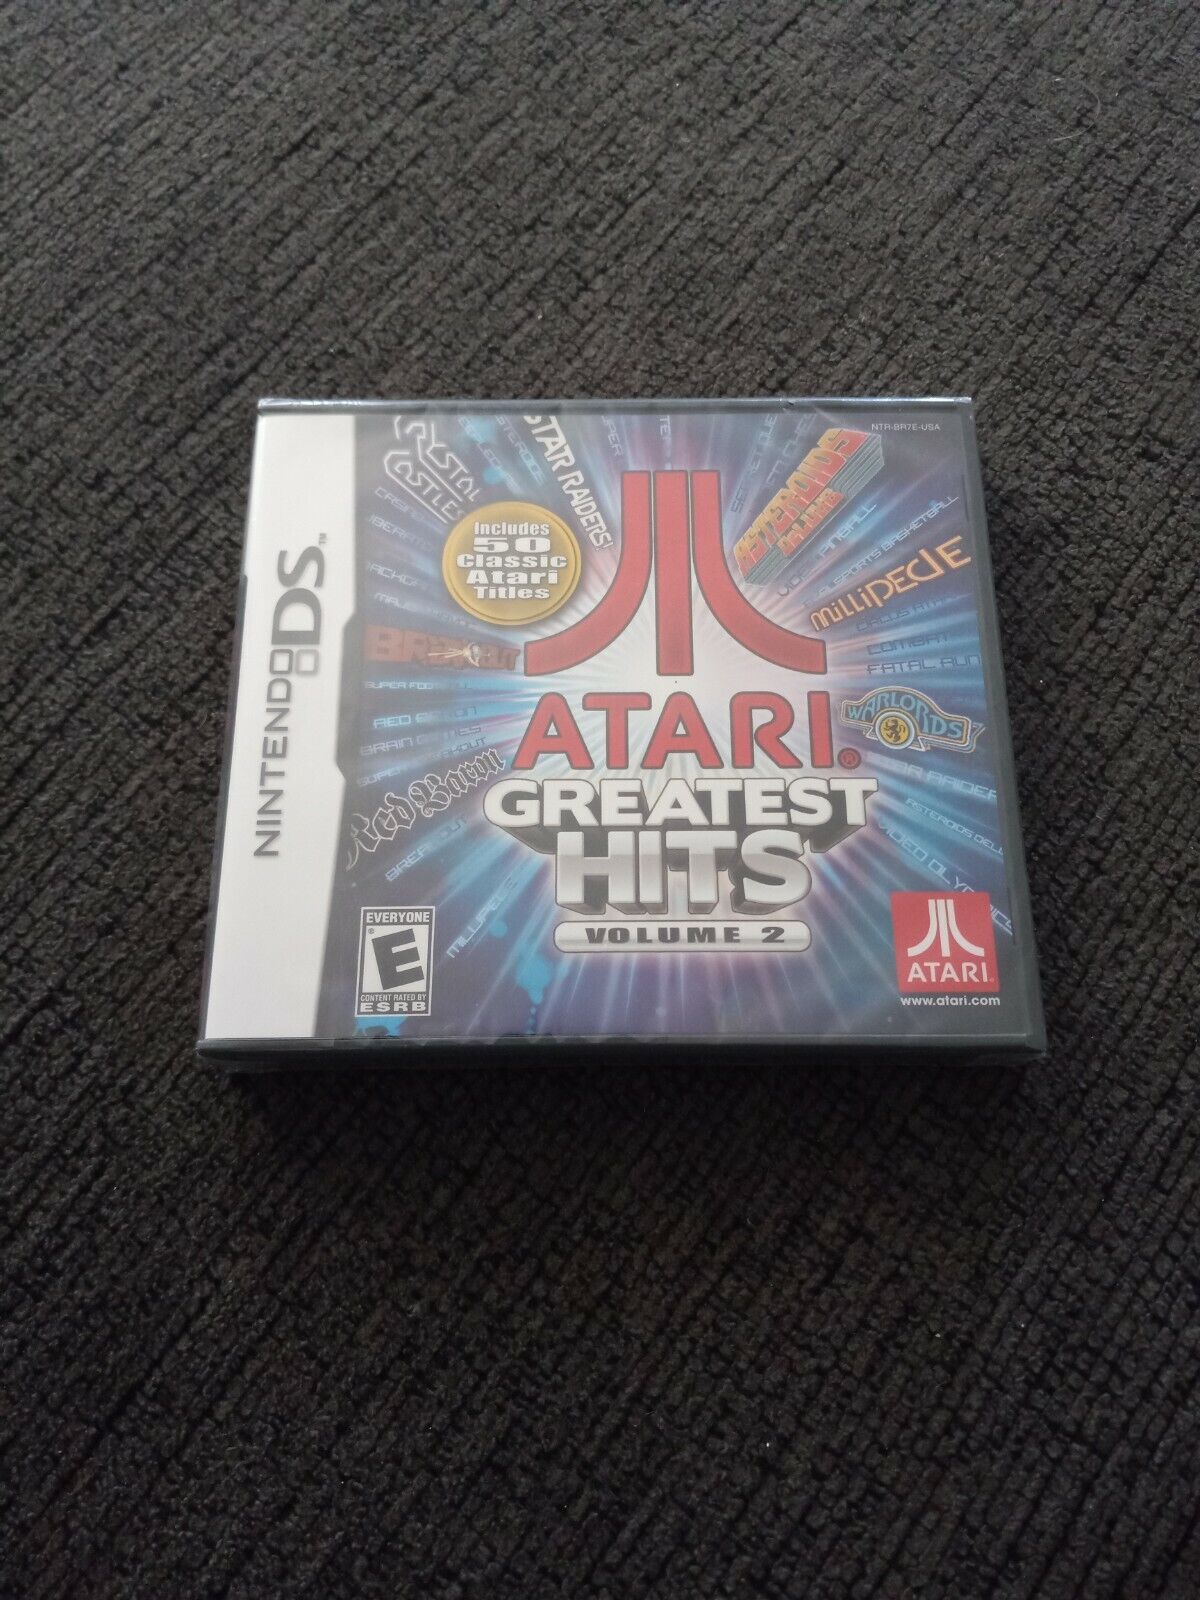 Atari Greatest Hits Volume 2 Nintendo Ds New And Sealed